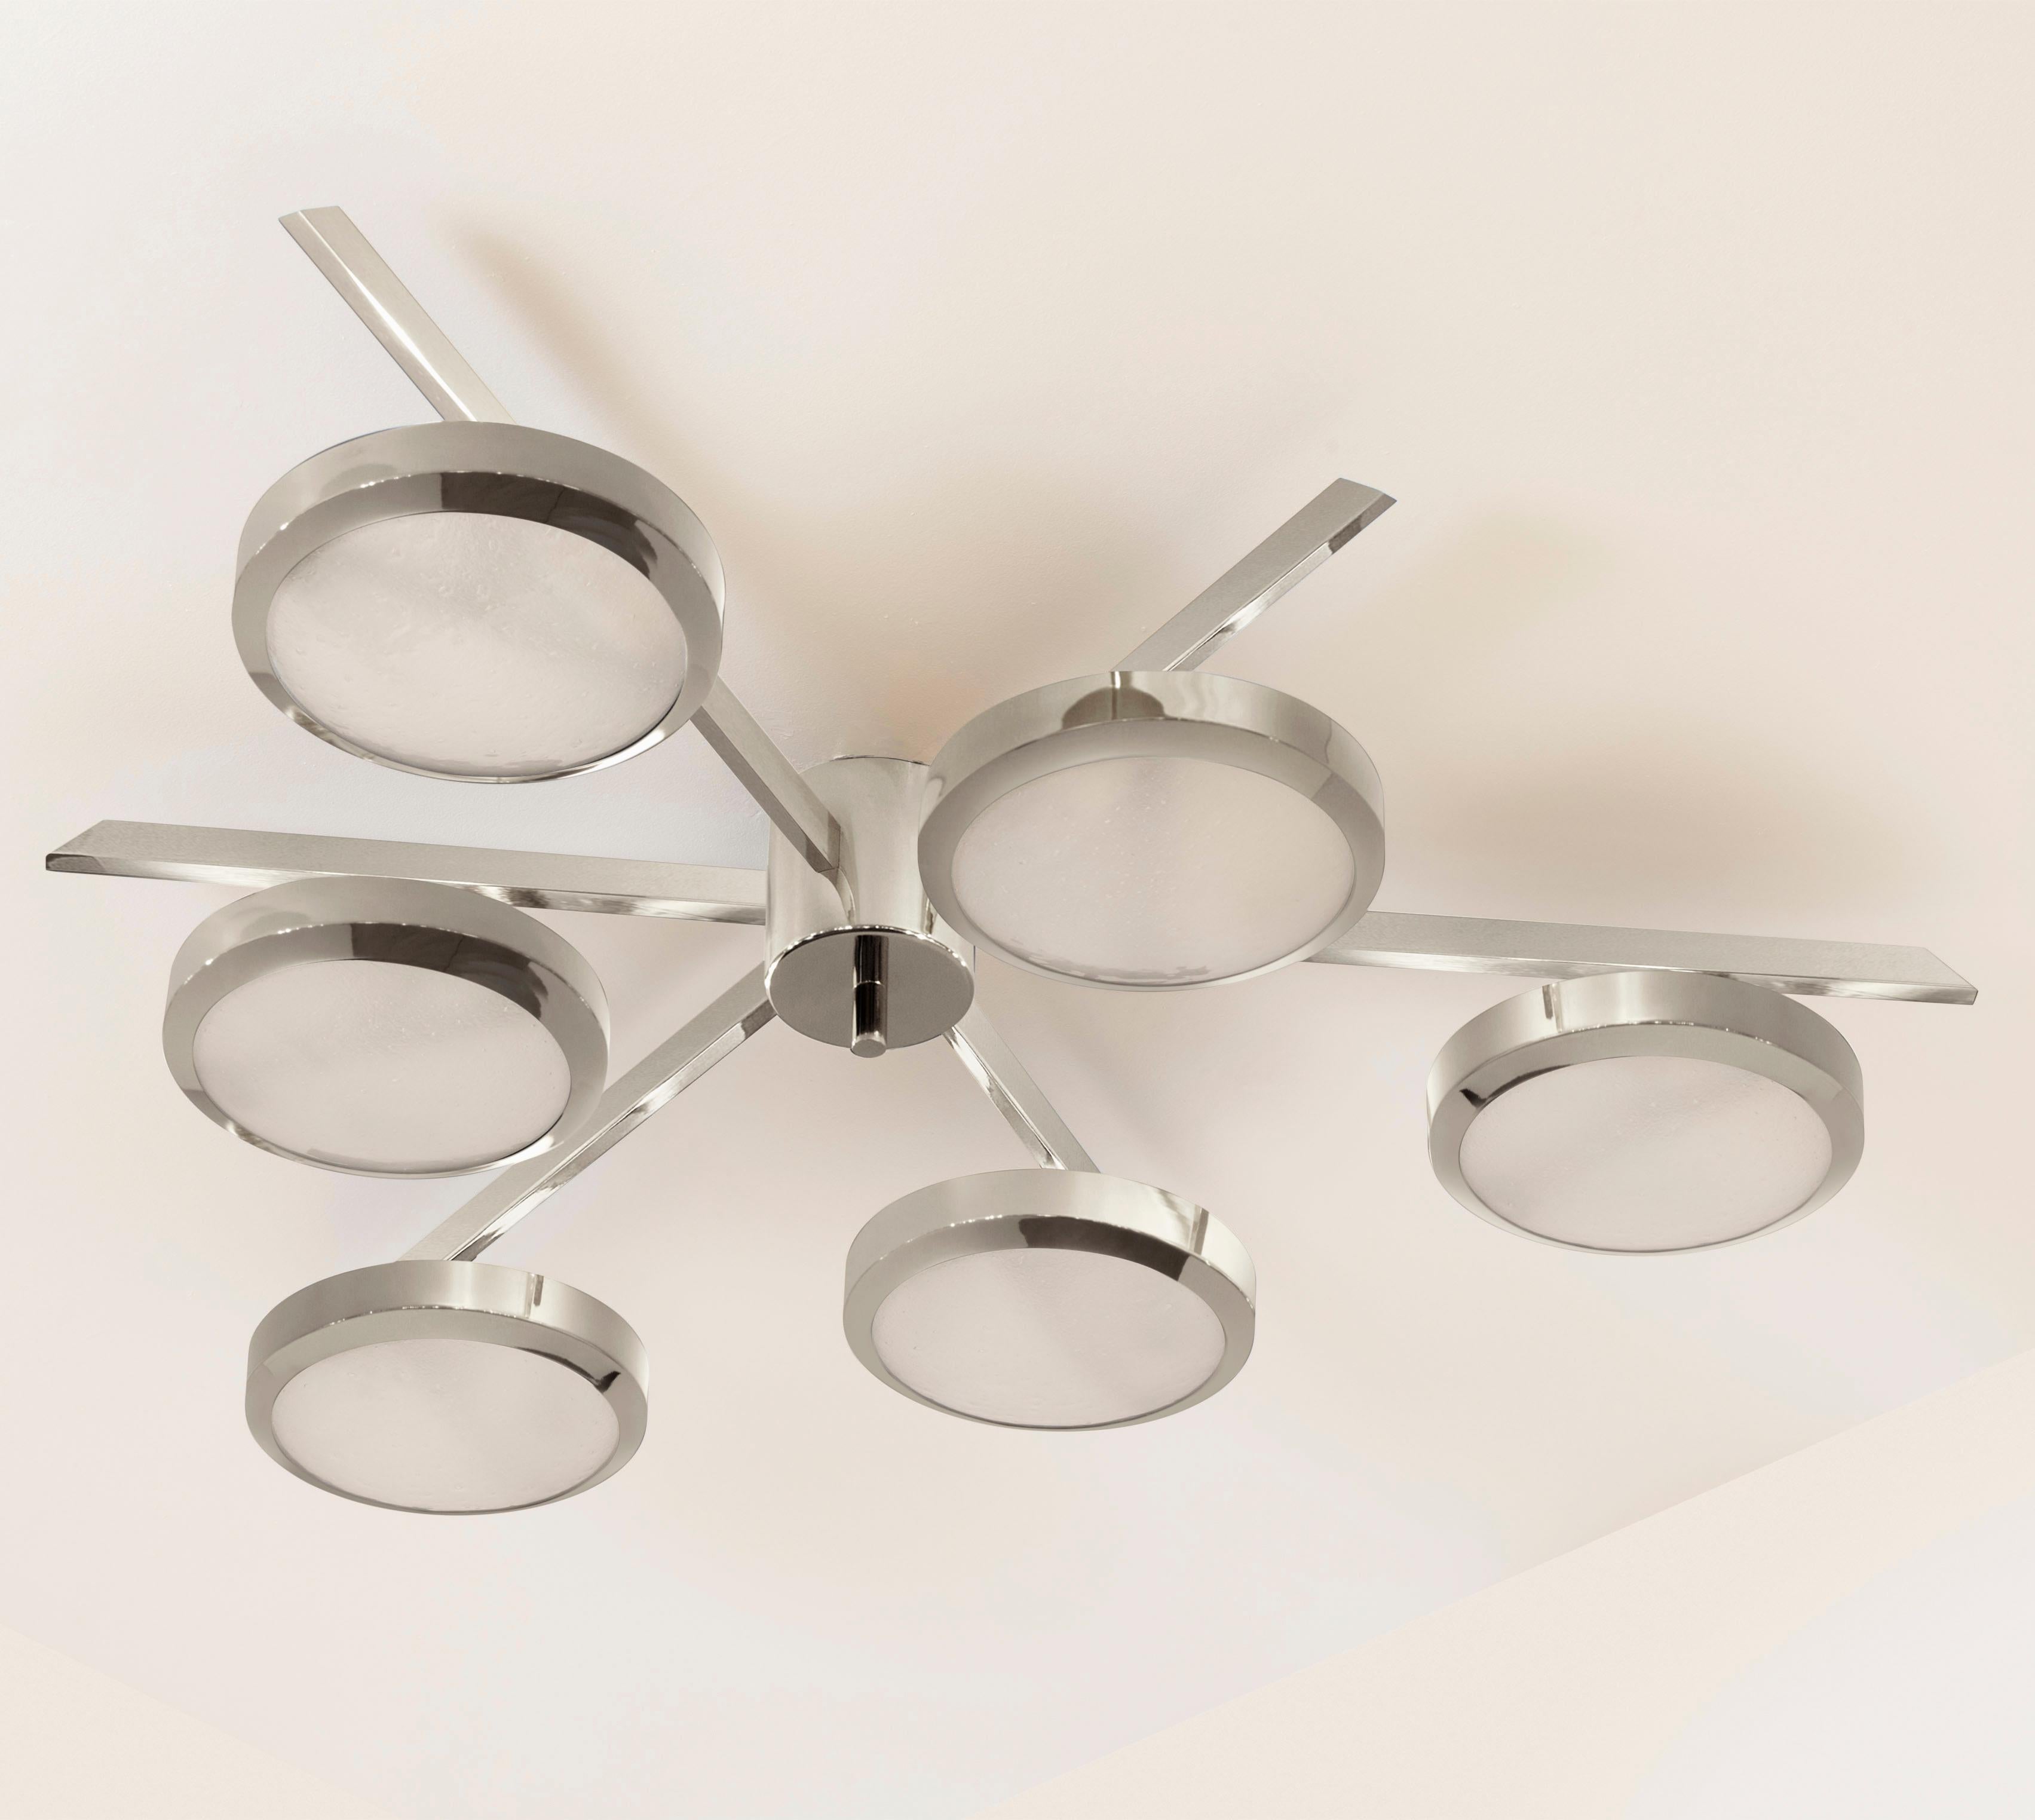 Modern Sei Ceiling Light by Gaspare Asaro - Polished Nickel Finish For Sale